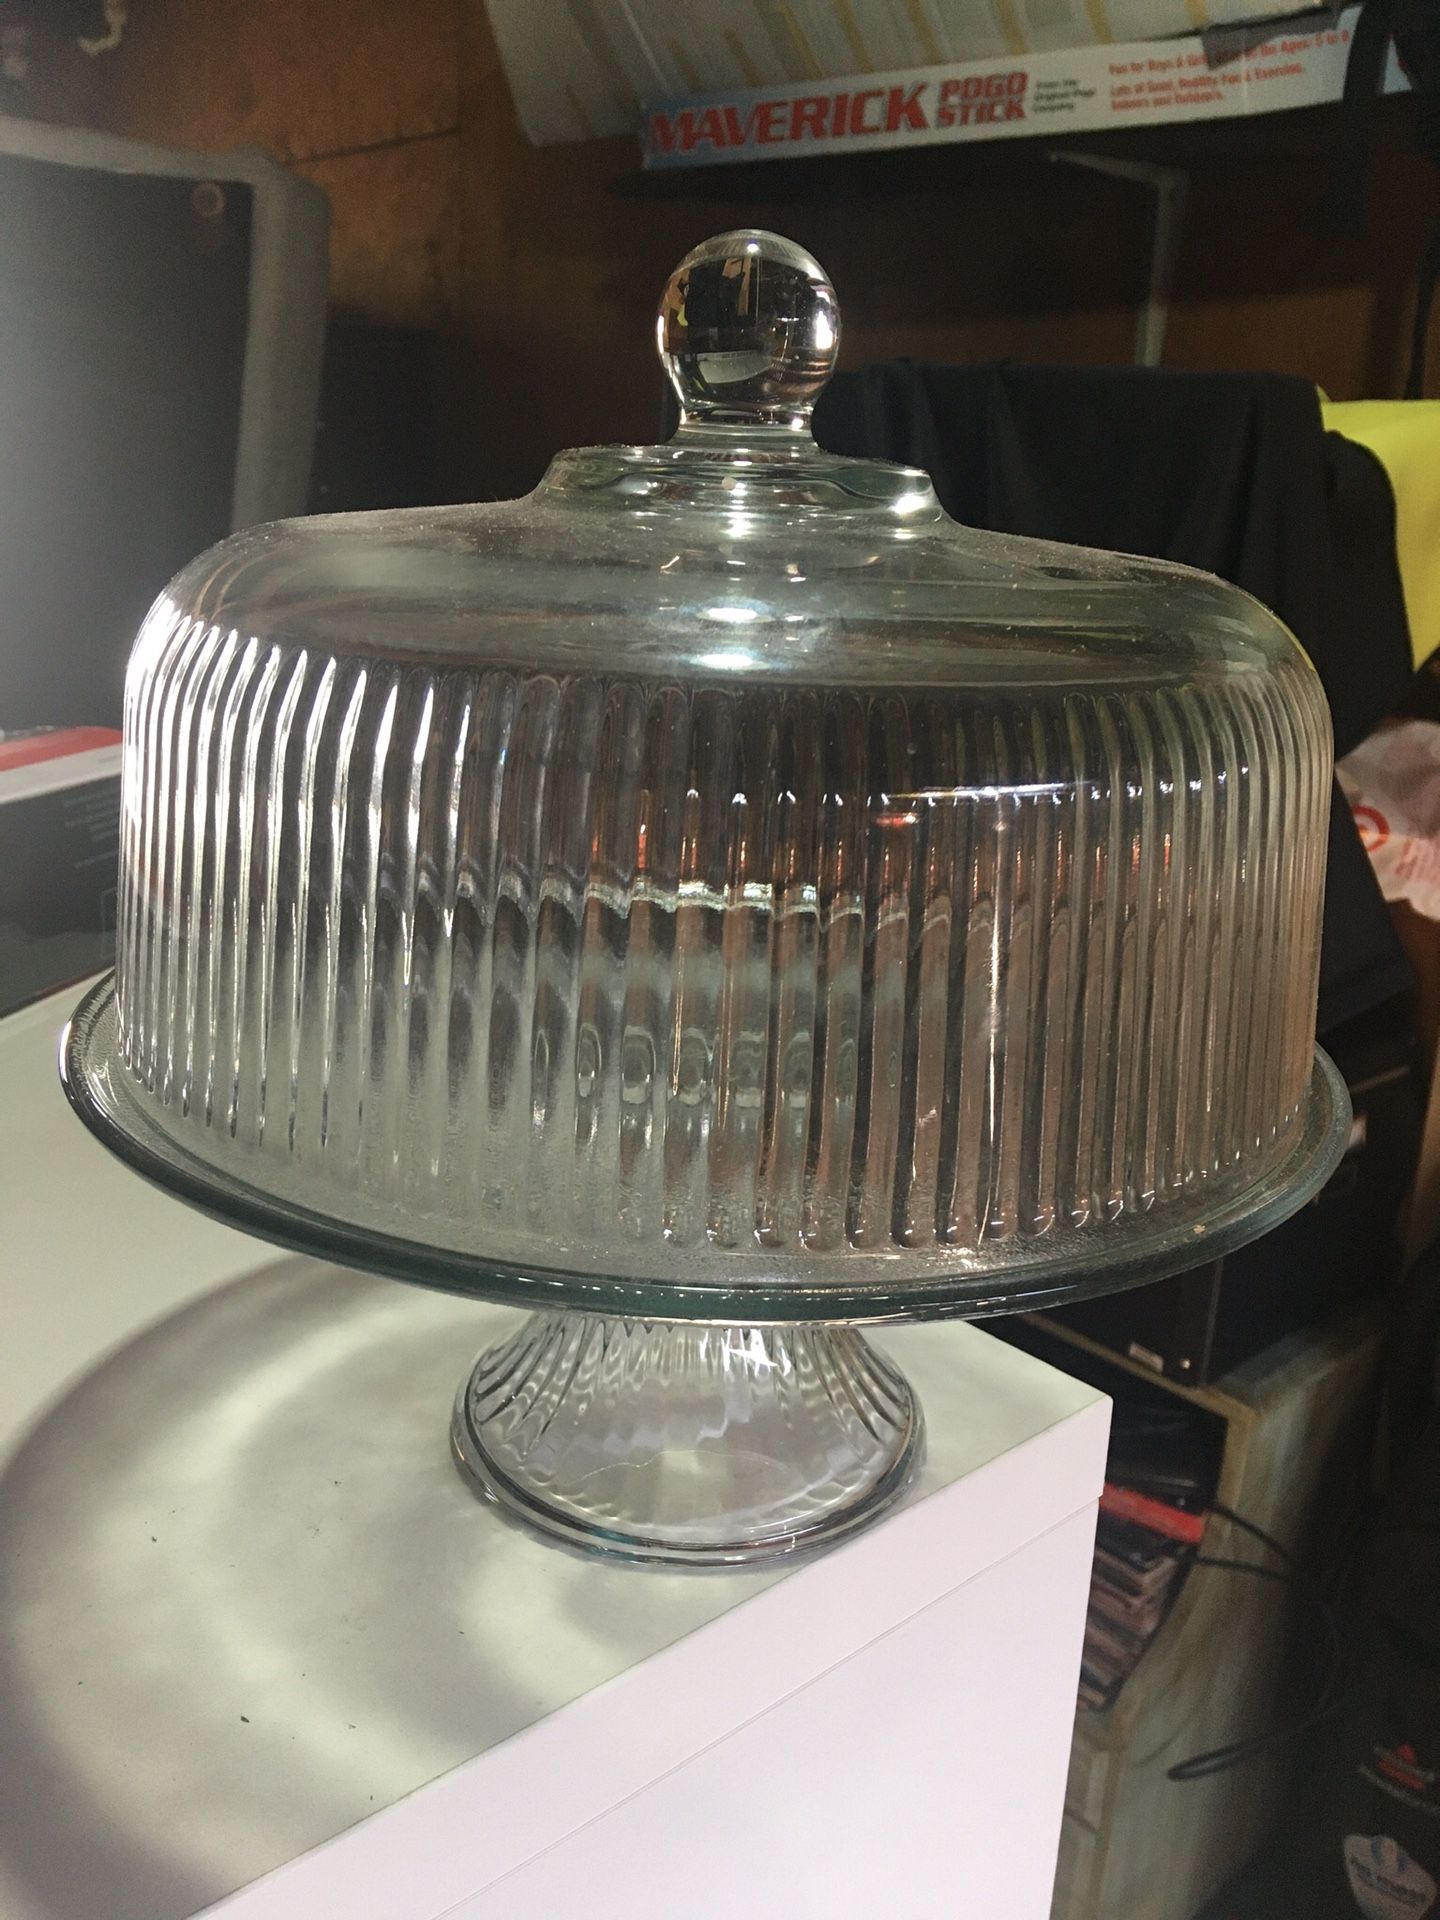 Cake stand with dome